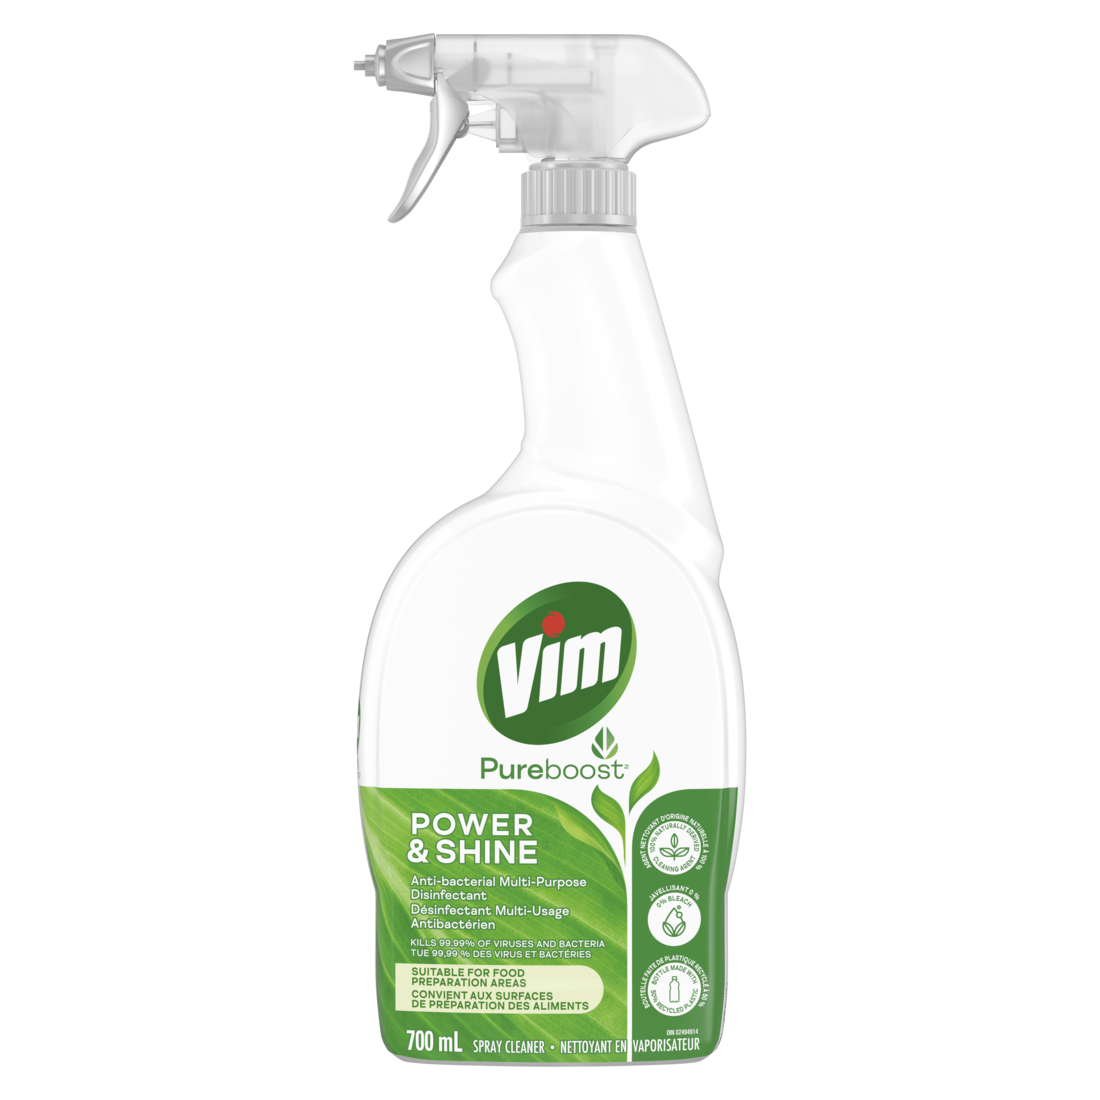 Vim PureBoost™ Multi-Purpose Spray 100% Naturally Derived Cleaning Agent Power & Shine Anti-Bacterial Disinfectant Kills 99.99% of Viruses and Bacteria 700ml